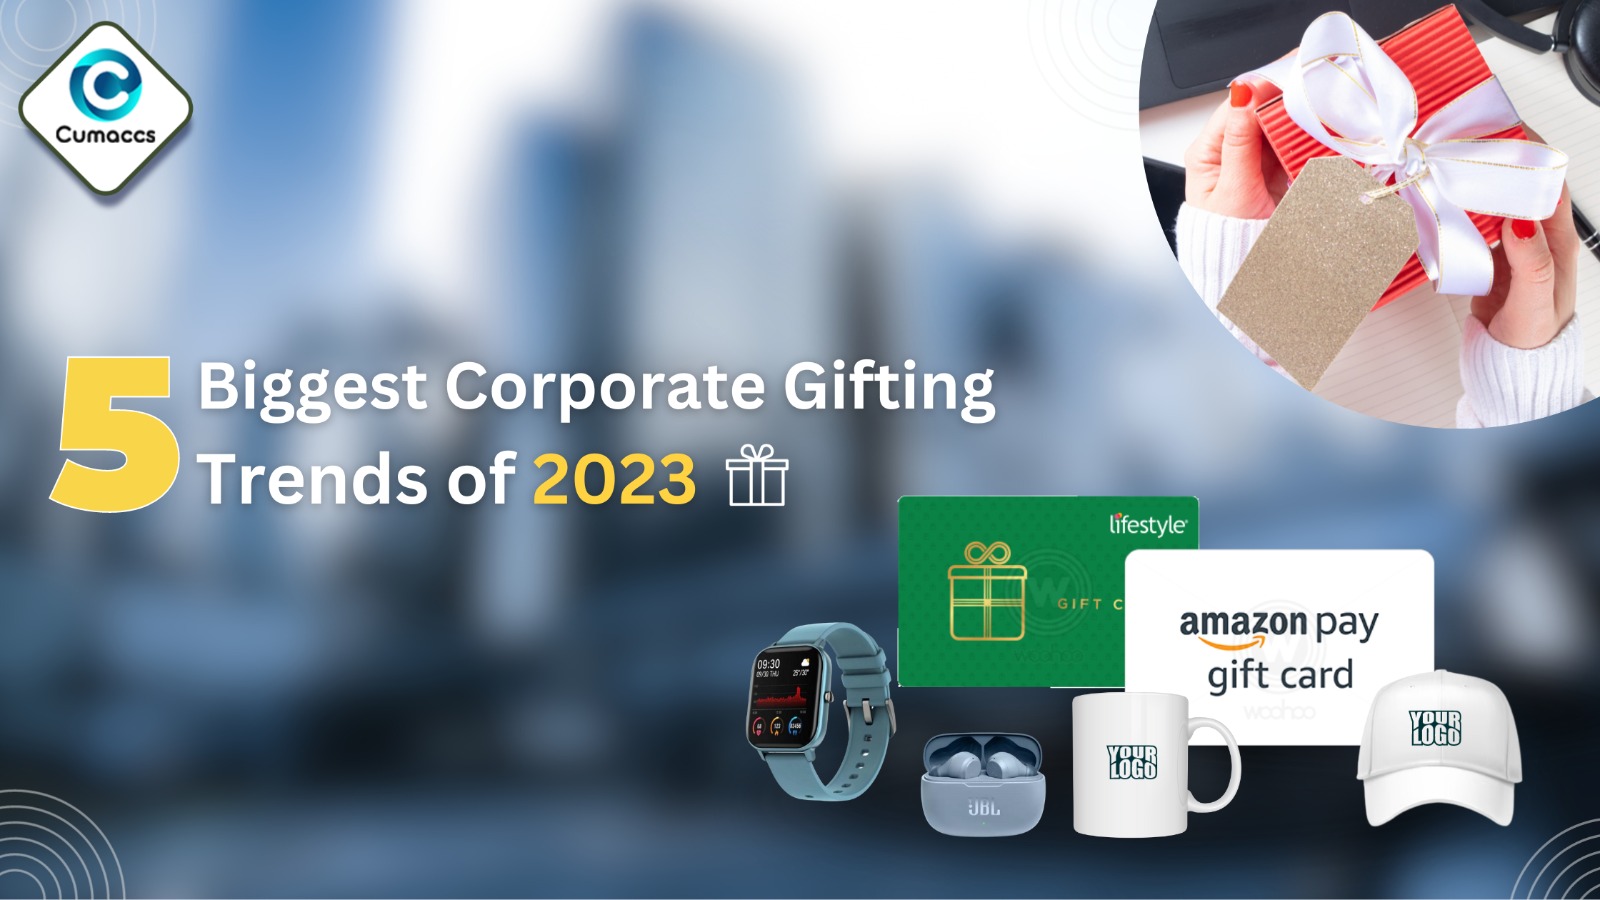 You are currently viewing 5 Biggest Corporate Gifting Trends of 2023